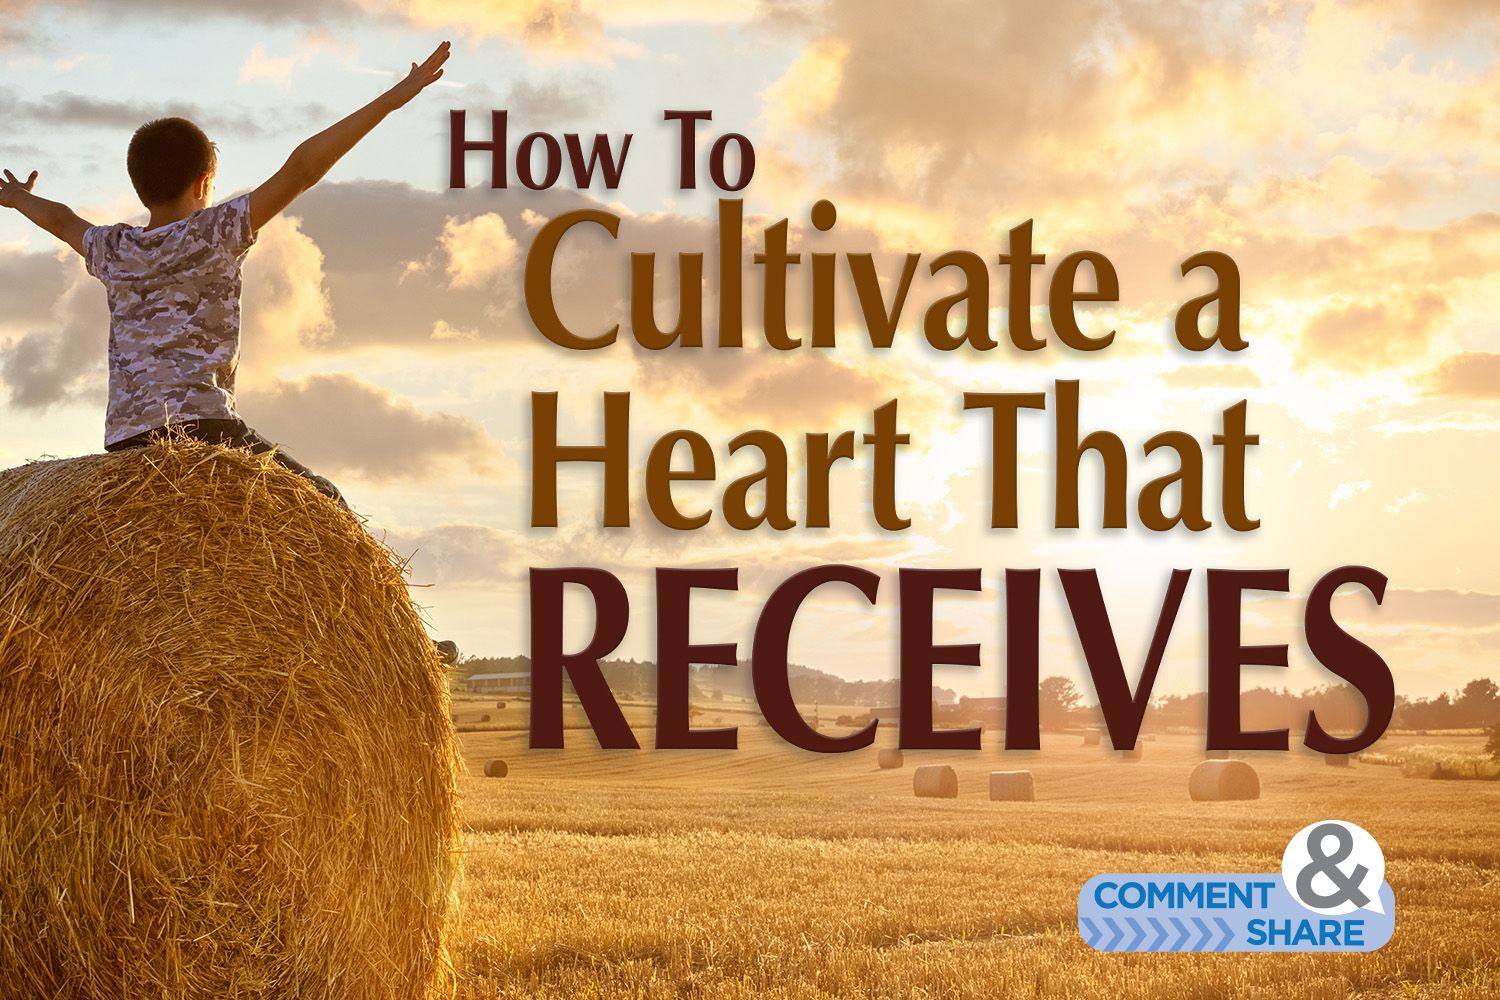 How to Cultivate a Heart that Receives blog post